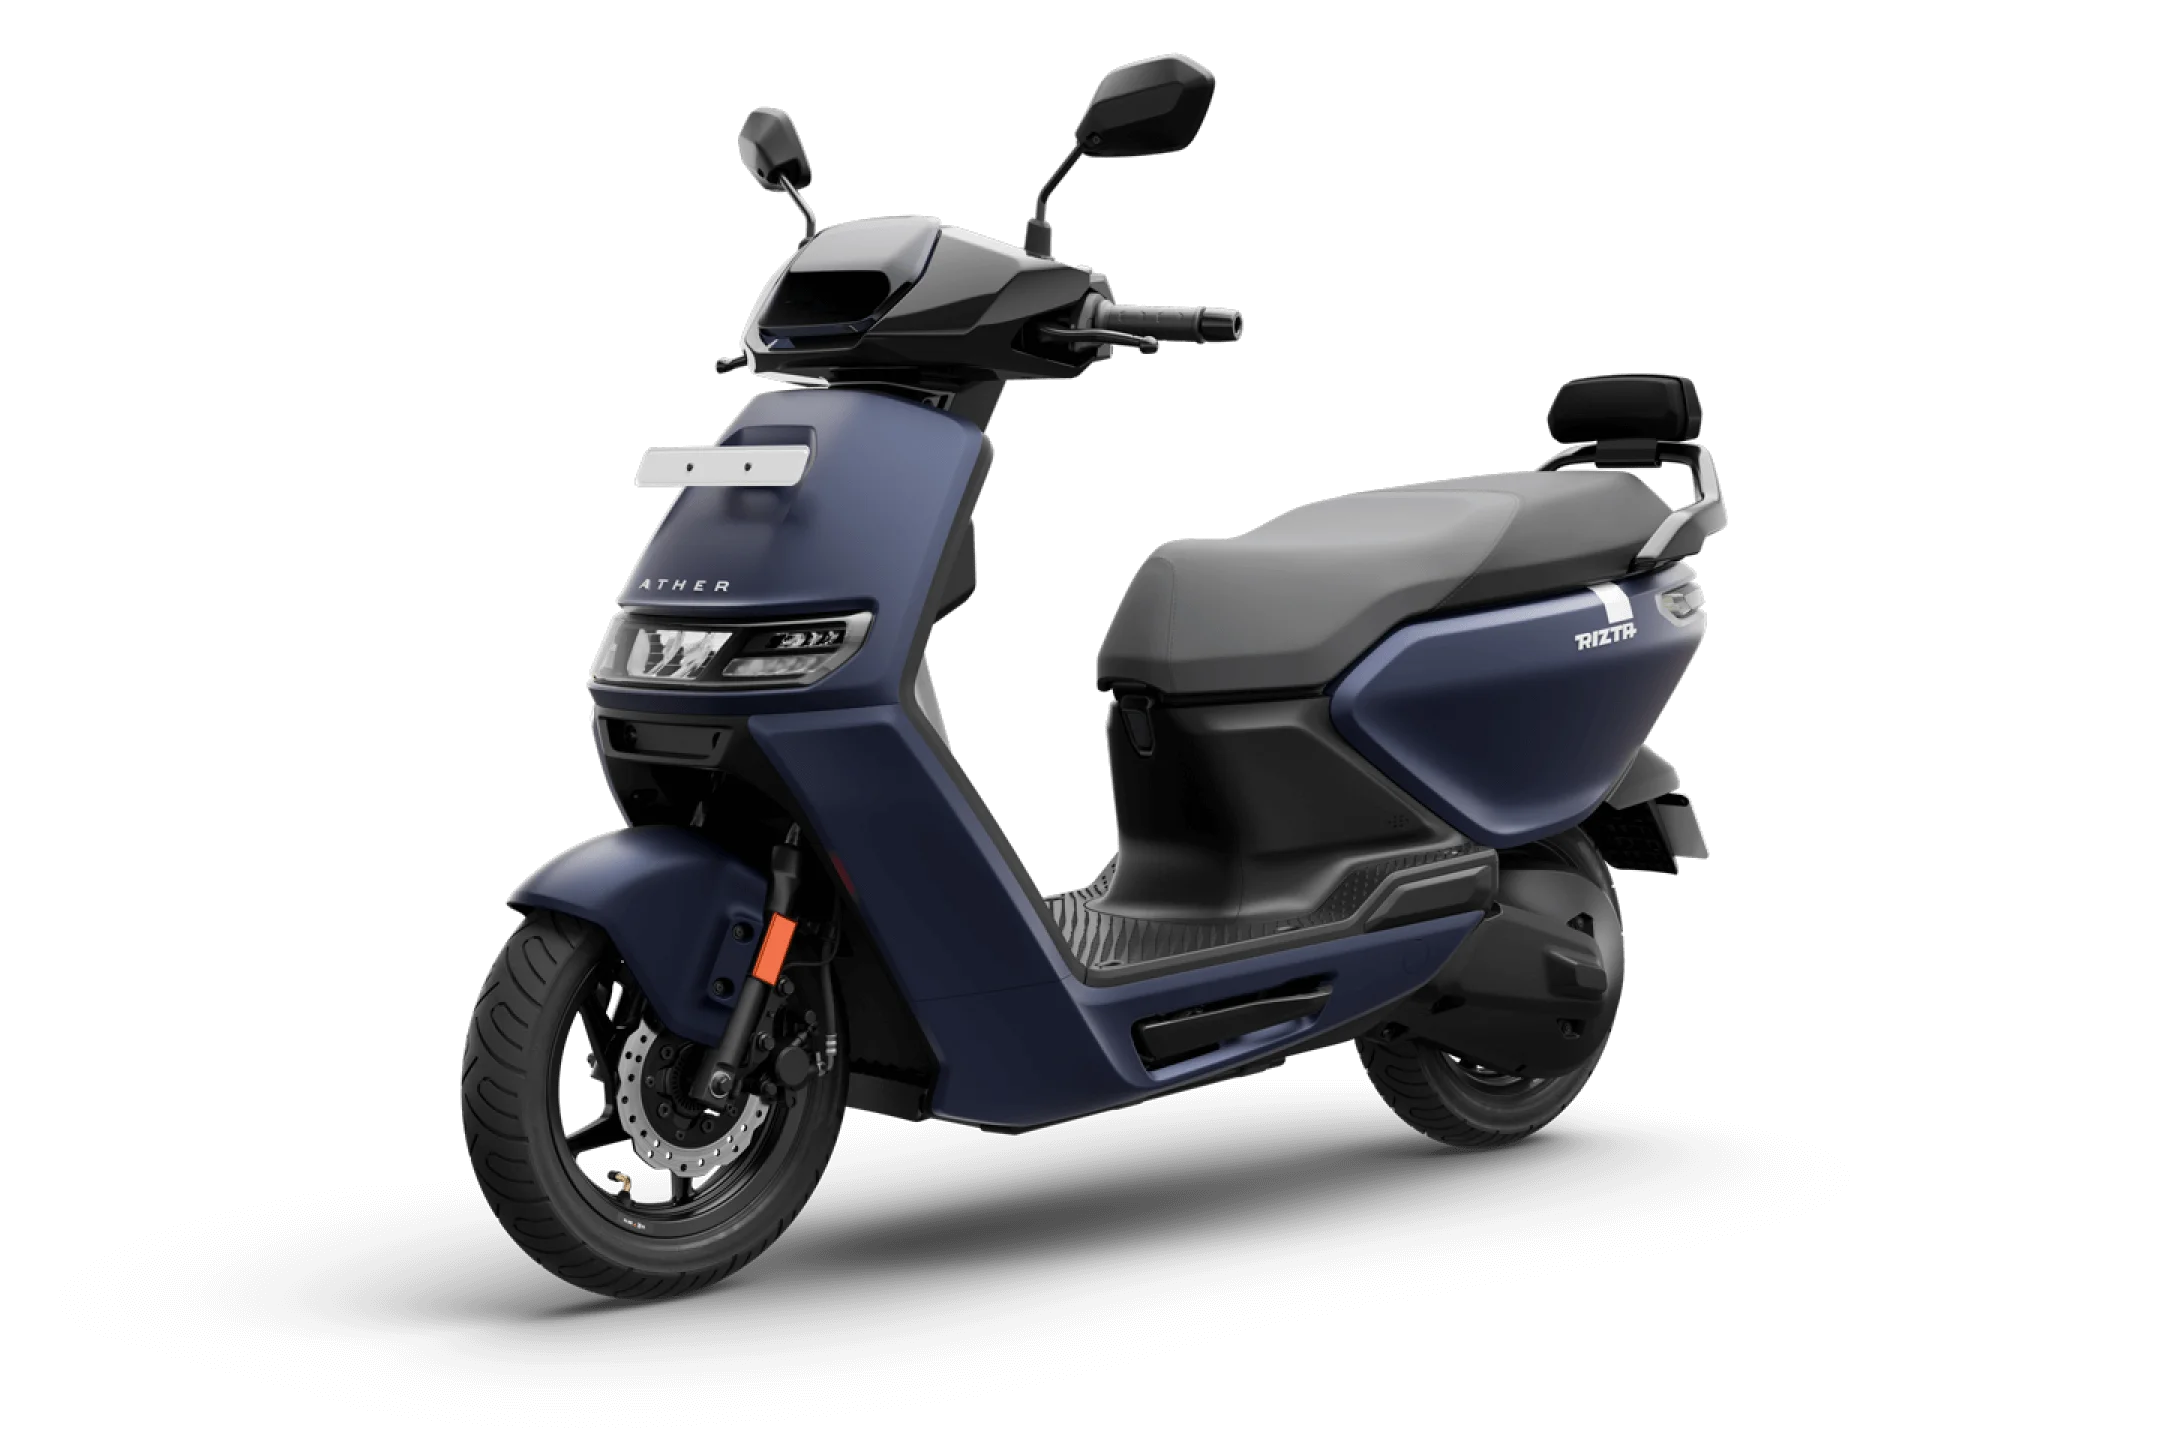 Ather Launches New Electric Scooter: The Feature-Packed Rizta